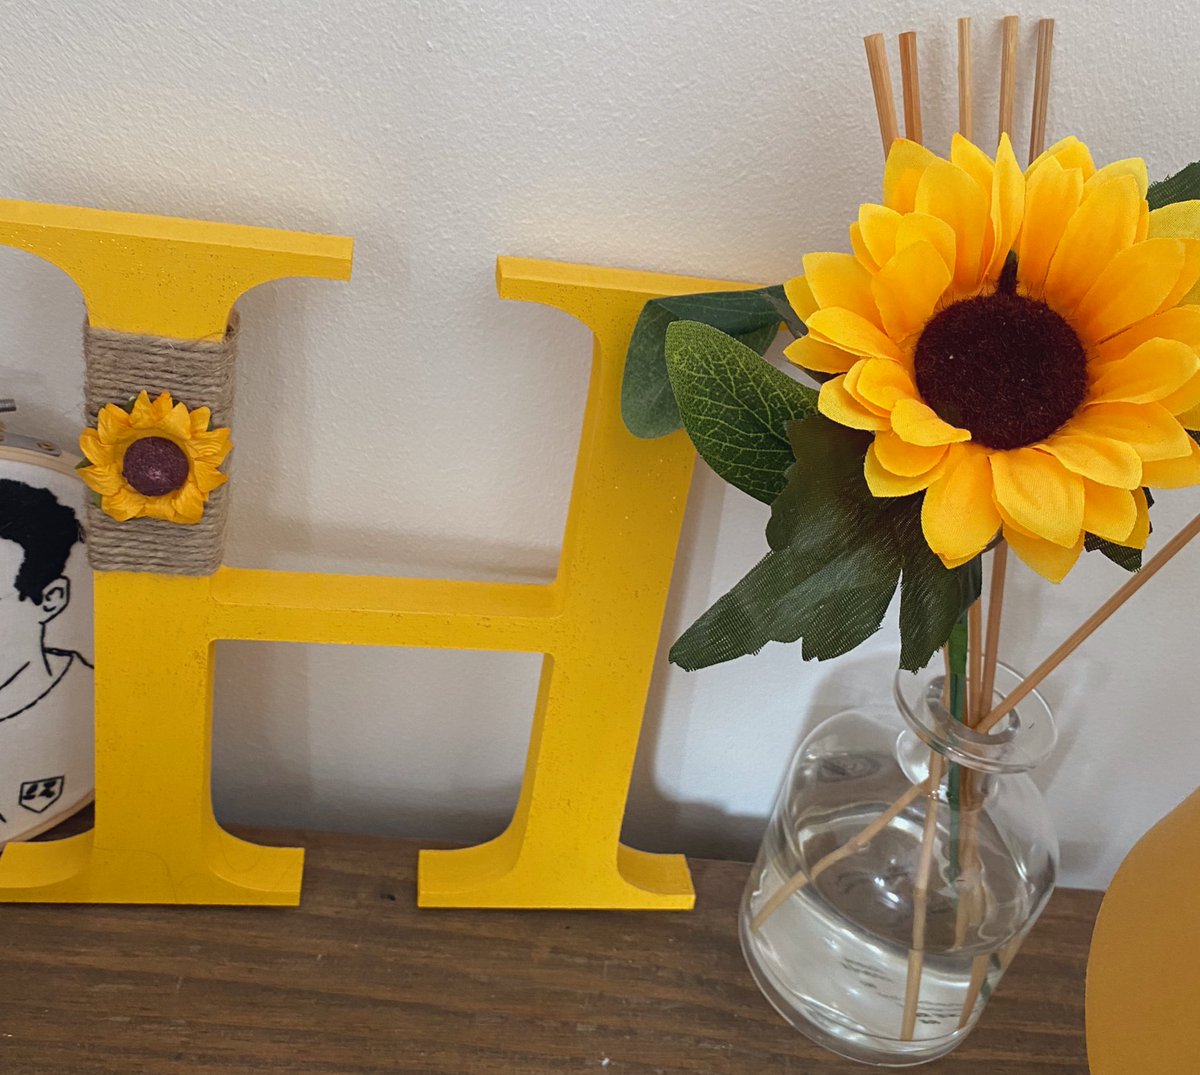 then also on my bedside cabinet I have this sunflower coaster, this print, a yellow letter h, sunflower diffuser which actually smells like sunflowers and this little yellow lamp 